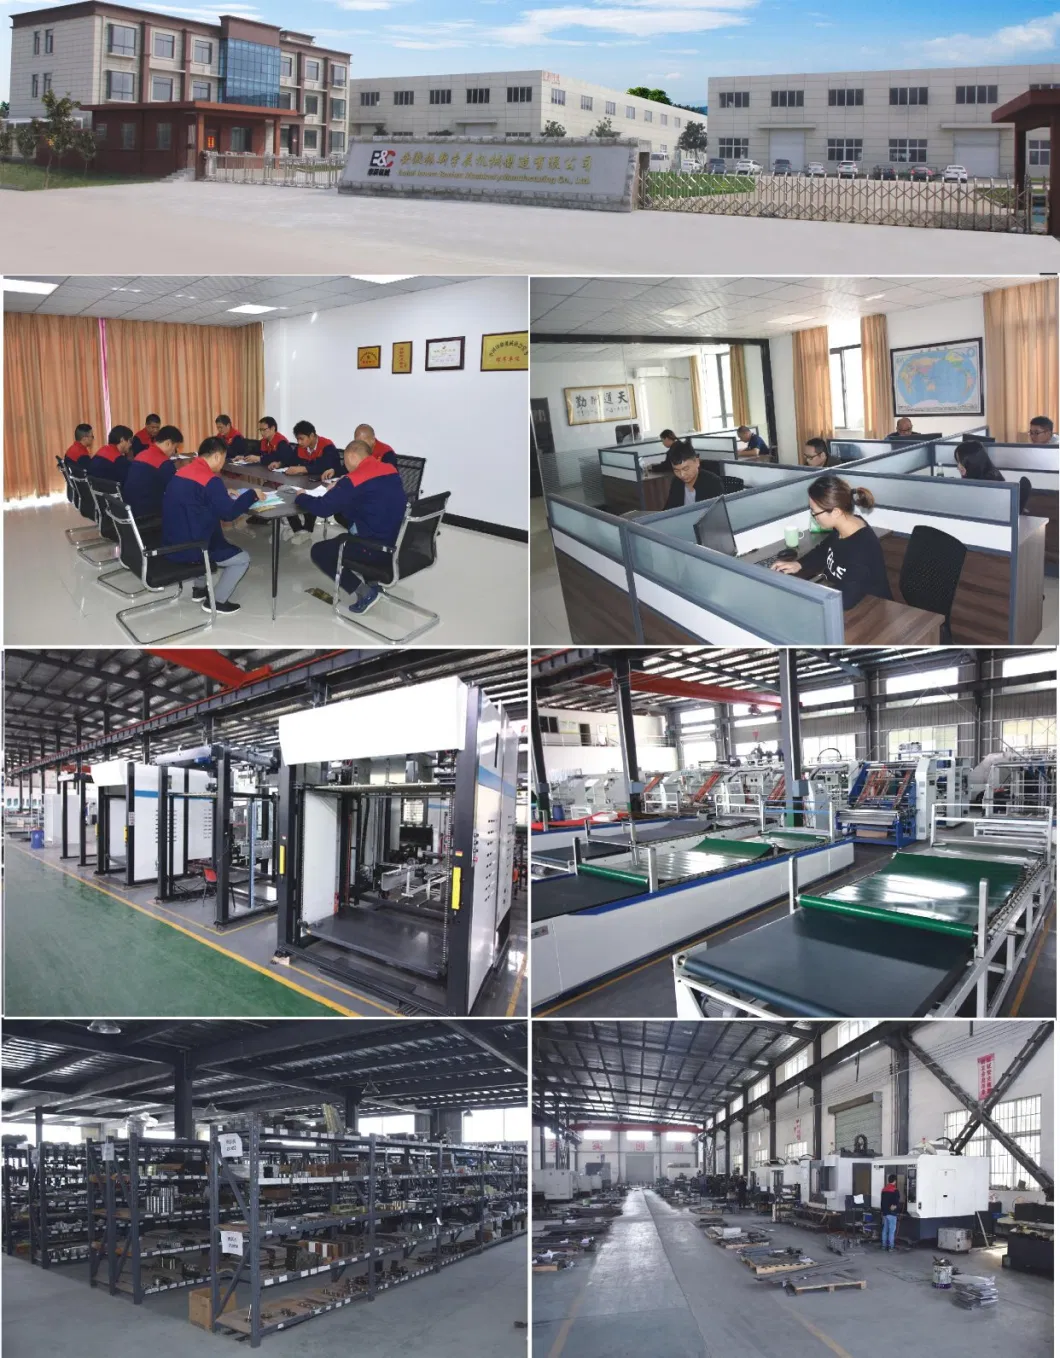 Automatic High Speed Sheet to Sheet Flute Laminating/Litho Laminating/ Paper Mounting/Flute Laminator/Litho Lamiantor Machine with Flip Flop Stacker